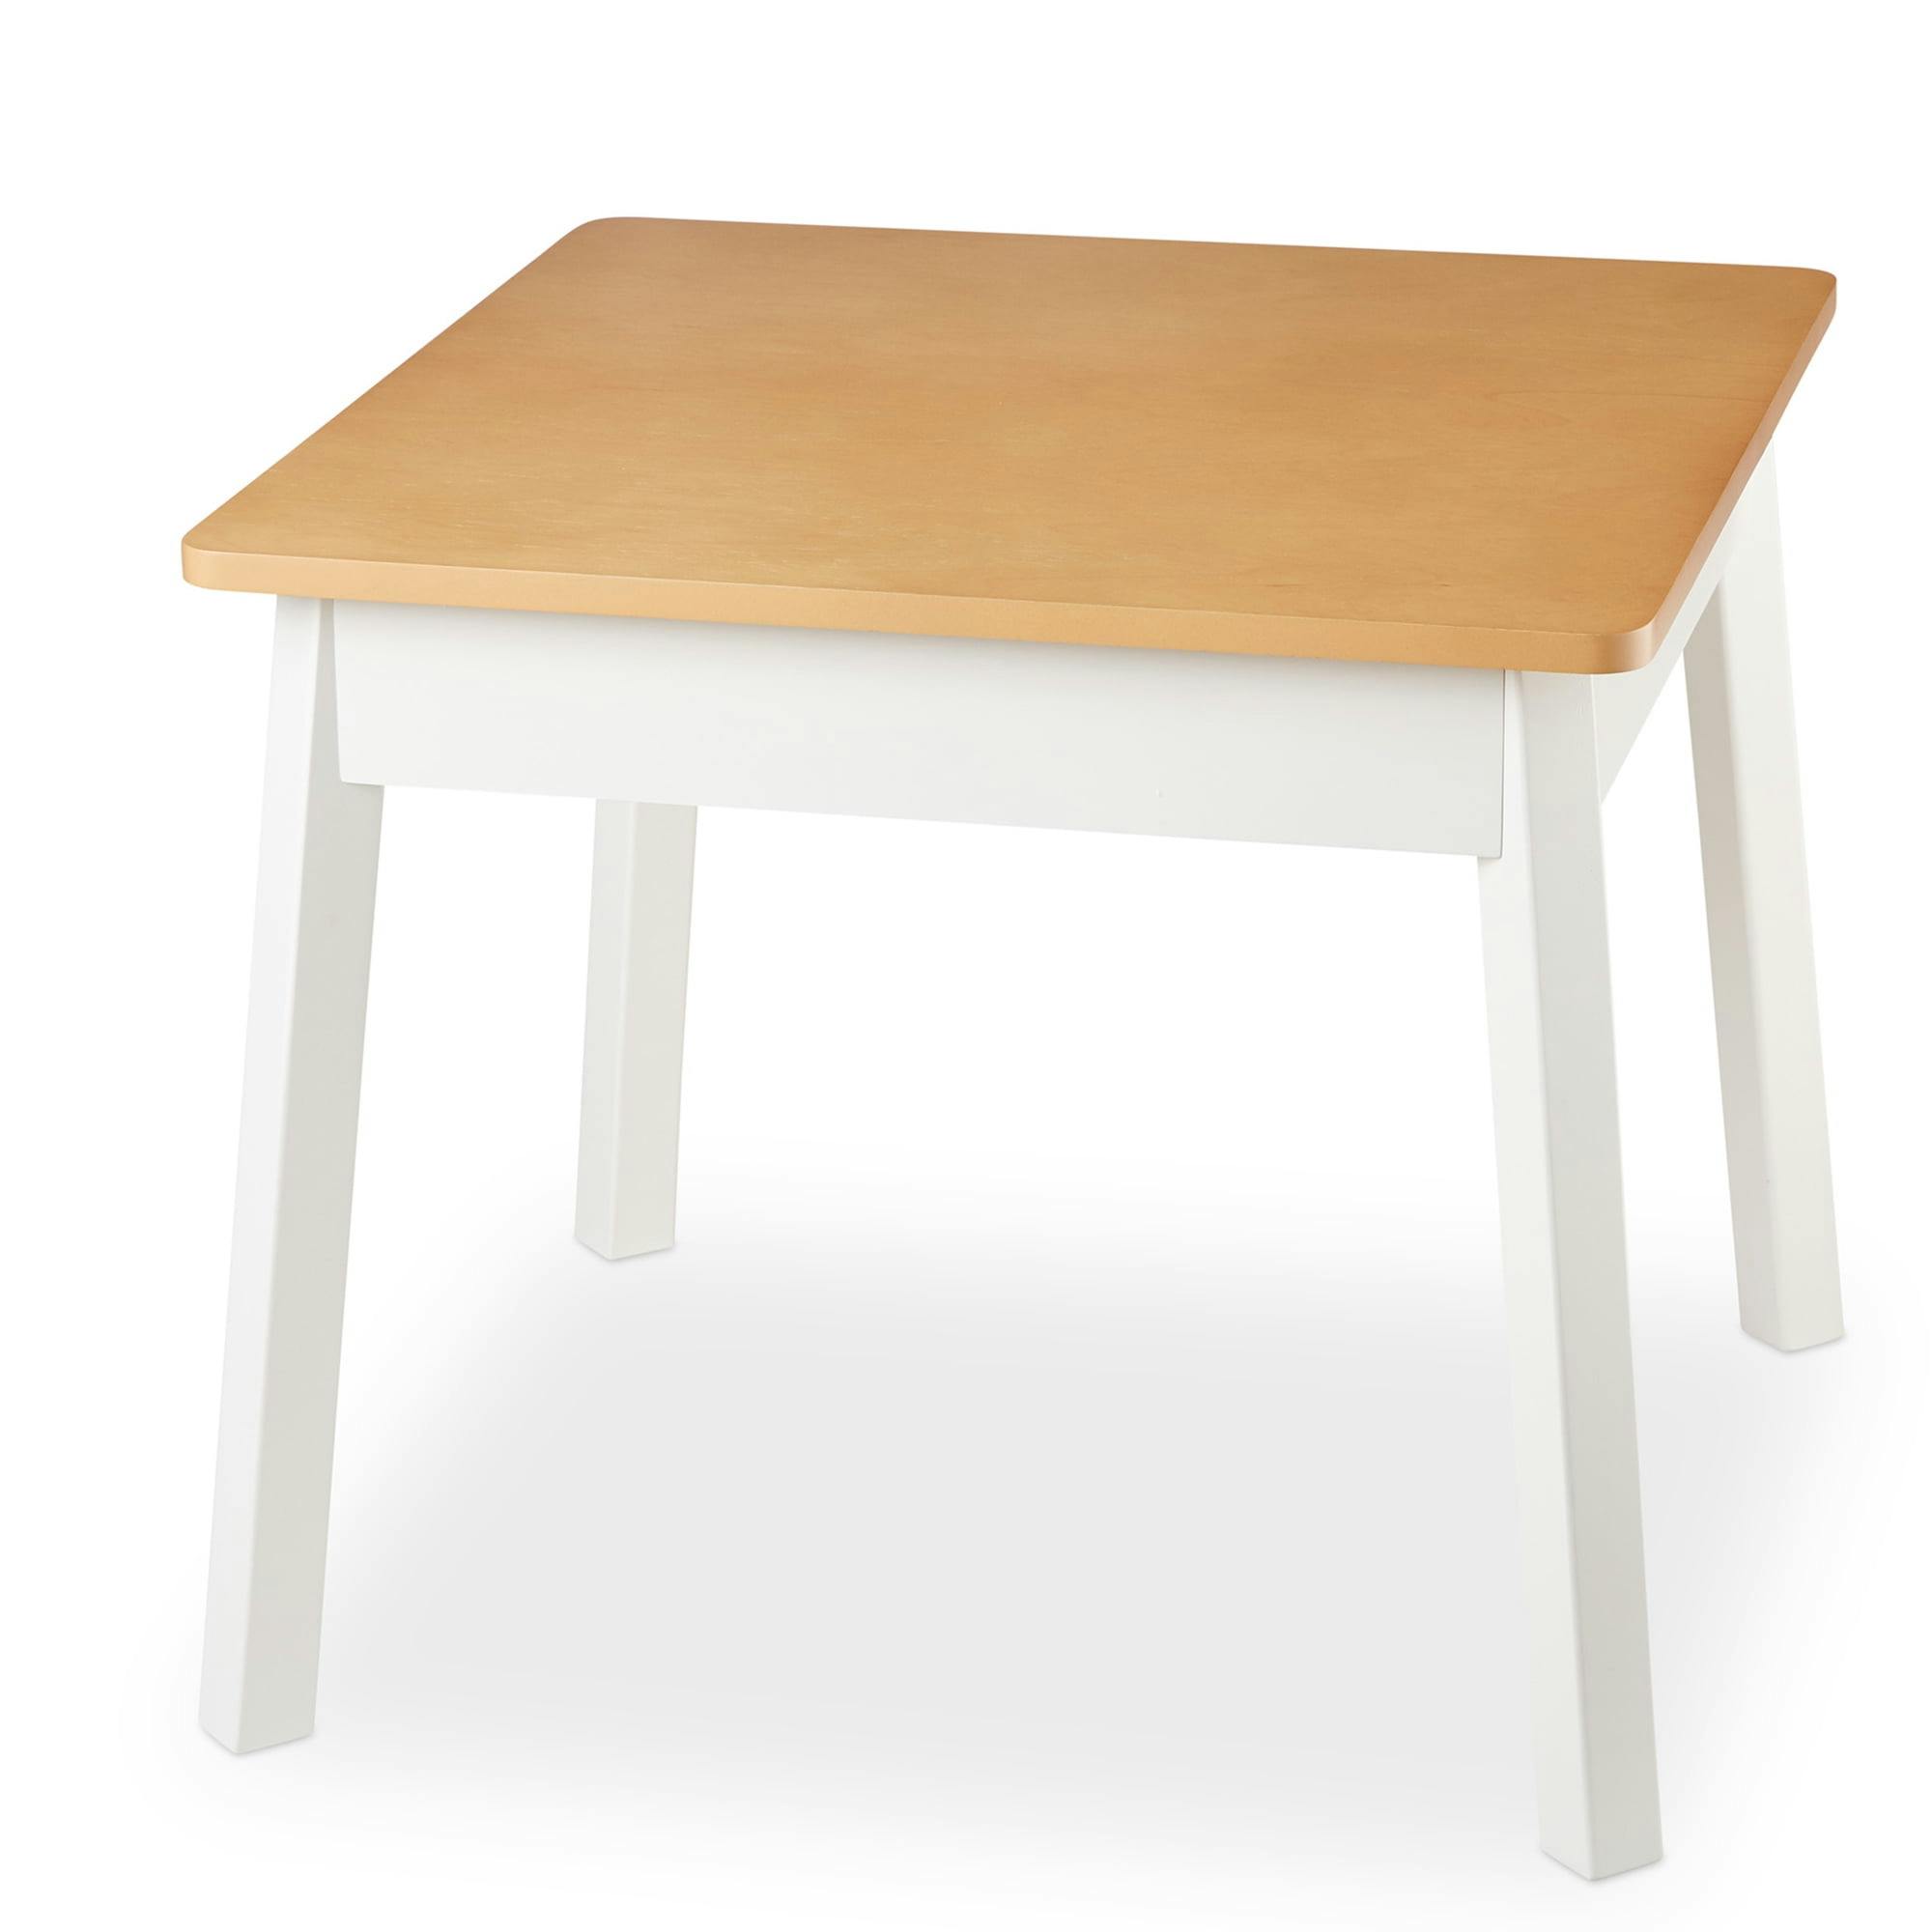 Charming Dual-Tone Kids Wooden Play Table - Natural/White